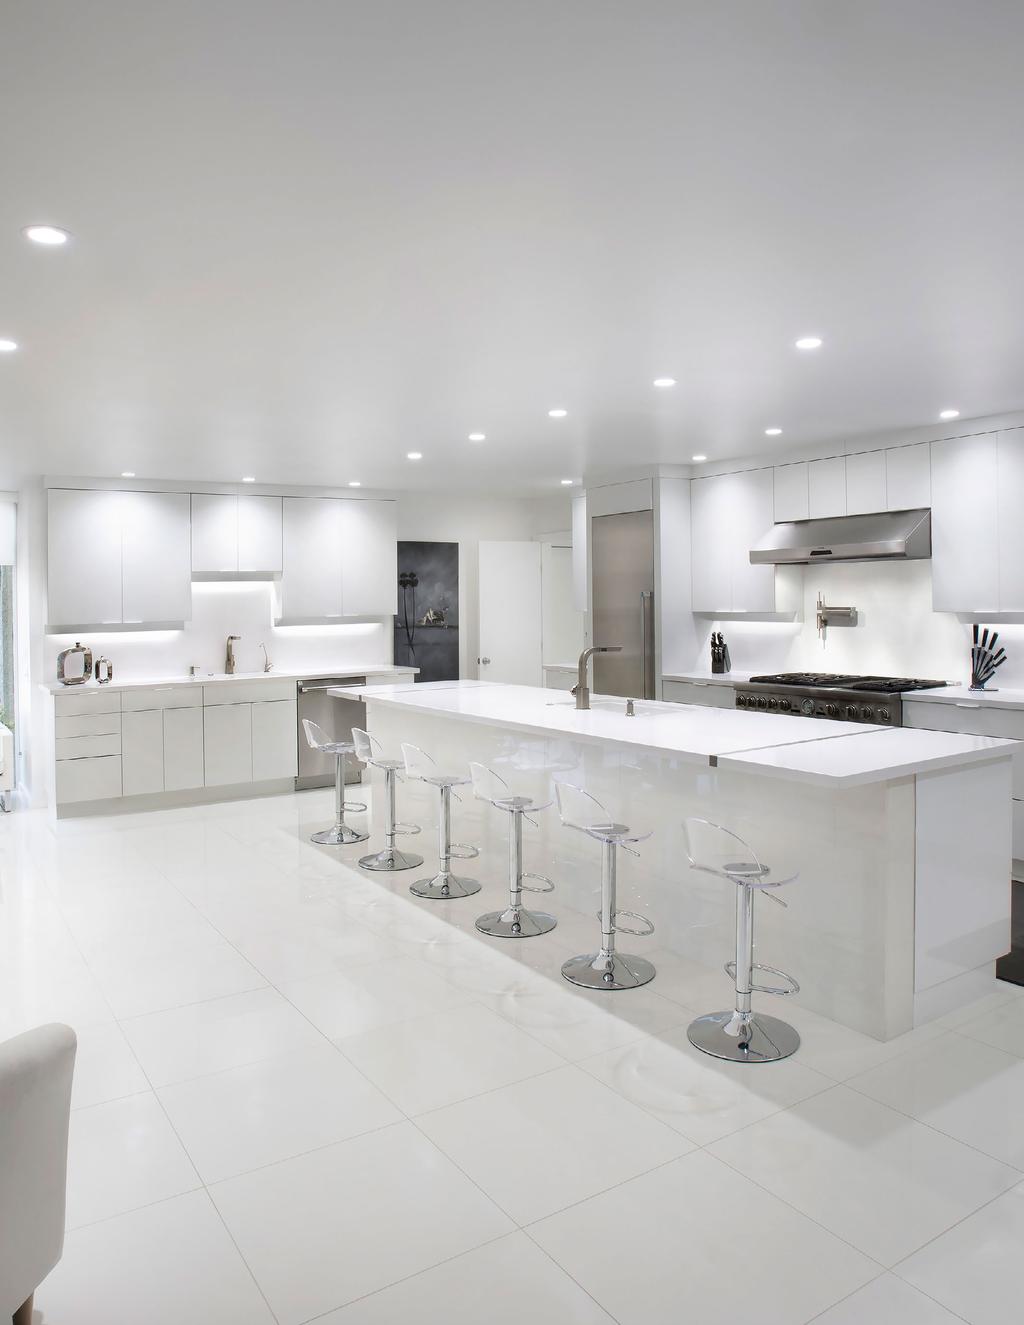 Where to Start While professionals should be hired to take on your kitchen remodeling job, you should know what outcome you are trying to accomplish and have a thorough understanding of your project